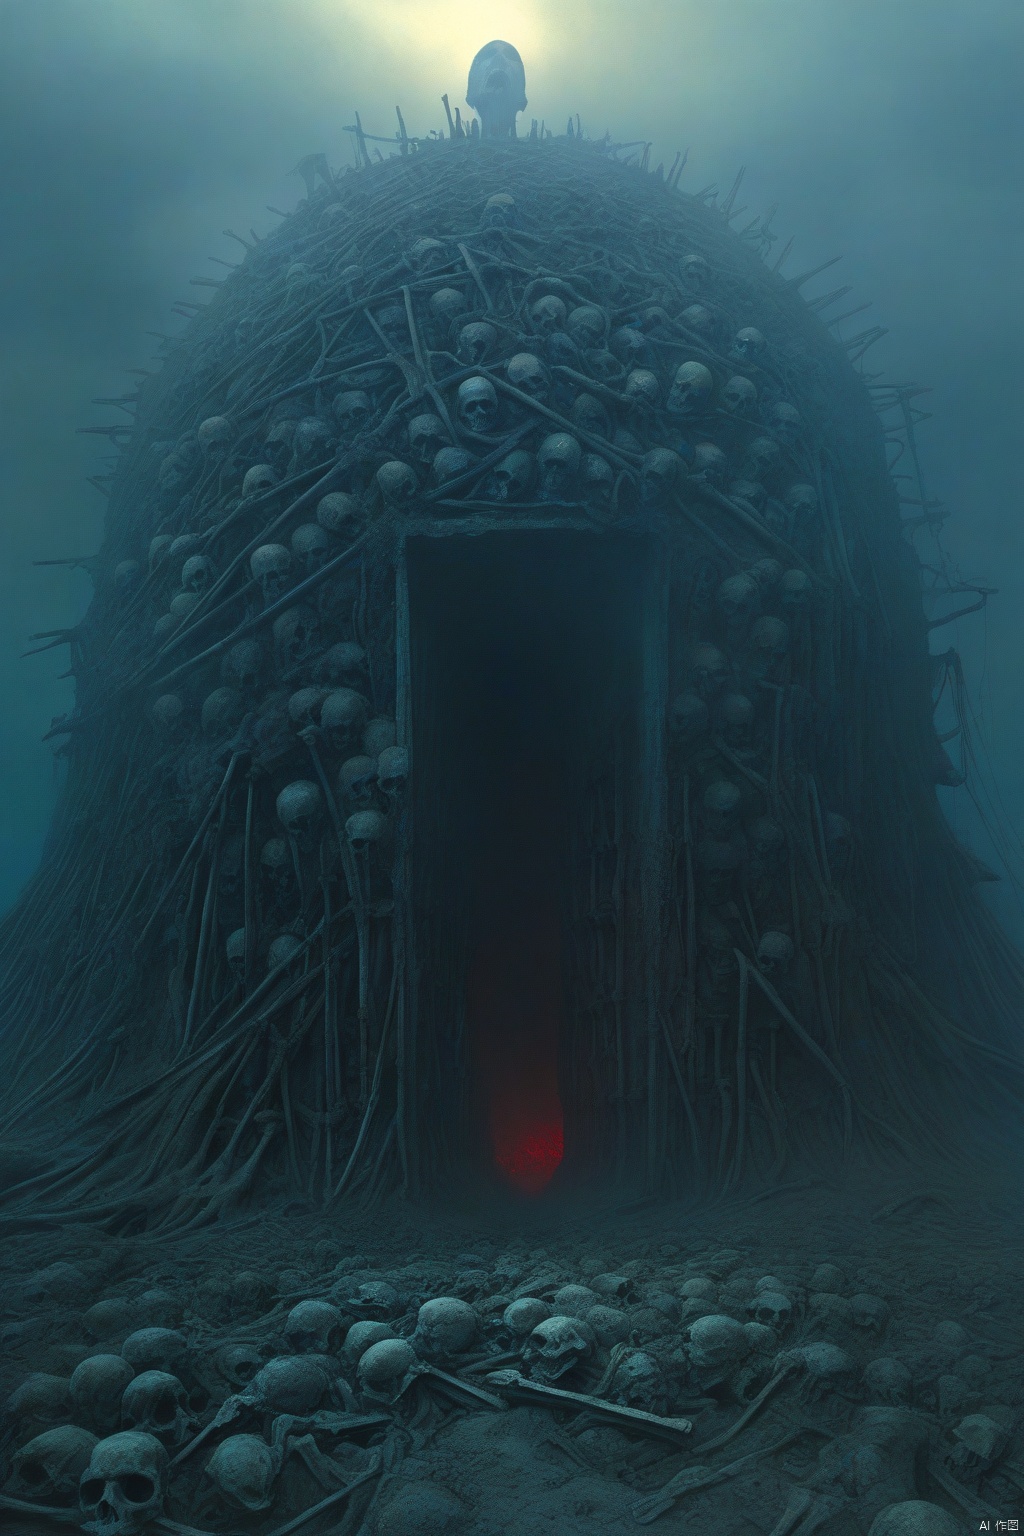  "Echoes from the past tormenting us for our mistakes, by Zdzislaw Beksinski, intricate, there is a dreadful rickety creation with too many bones and too many fingers in despair, nuclear apocalypse, decay, bones, driving red oil, screaming heads, surrealism, hyperrealism, octane render, blender, zbrush lovely 3D",